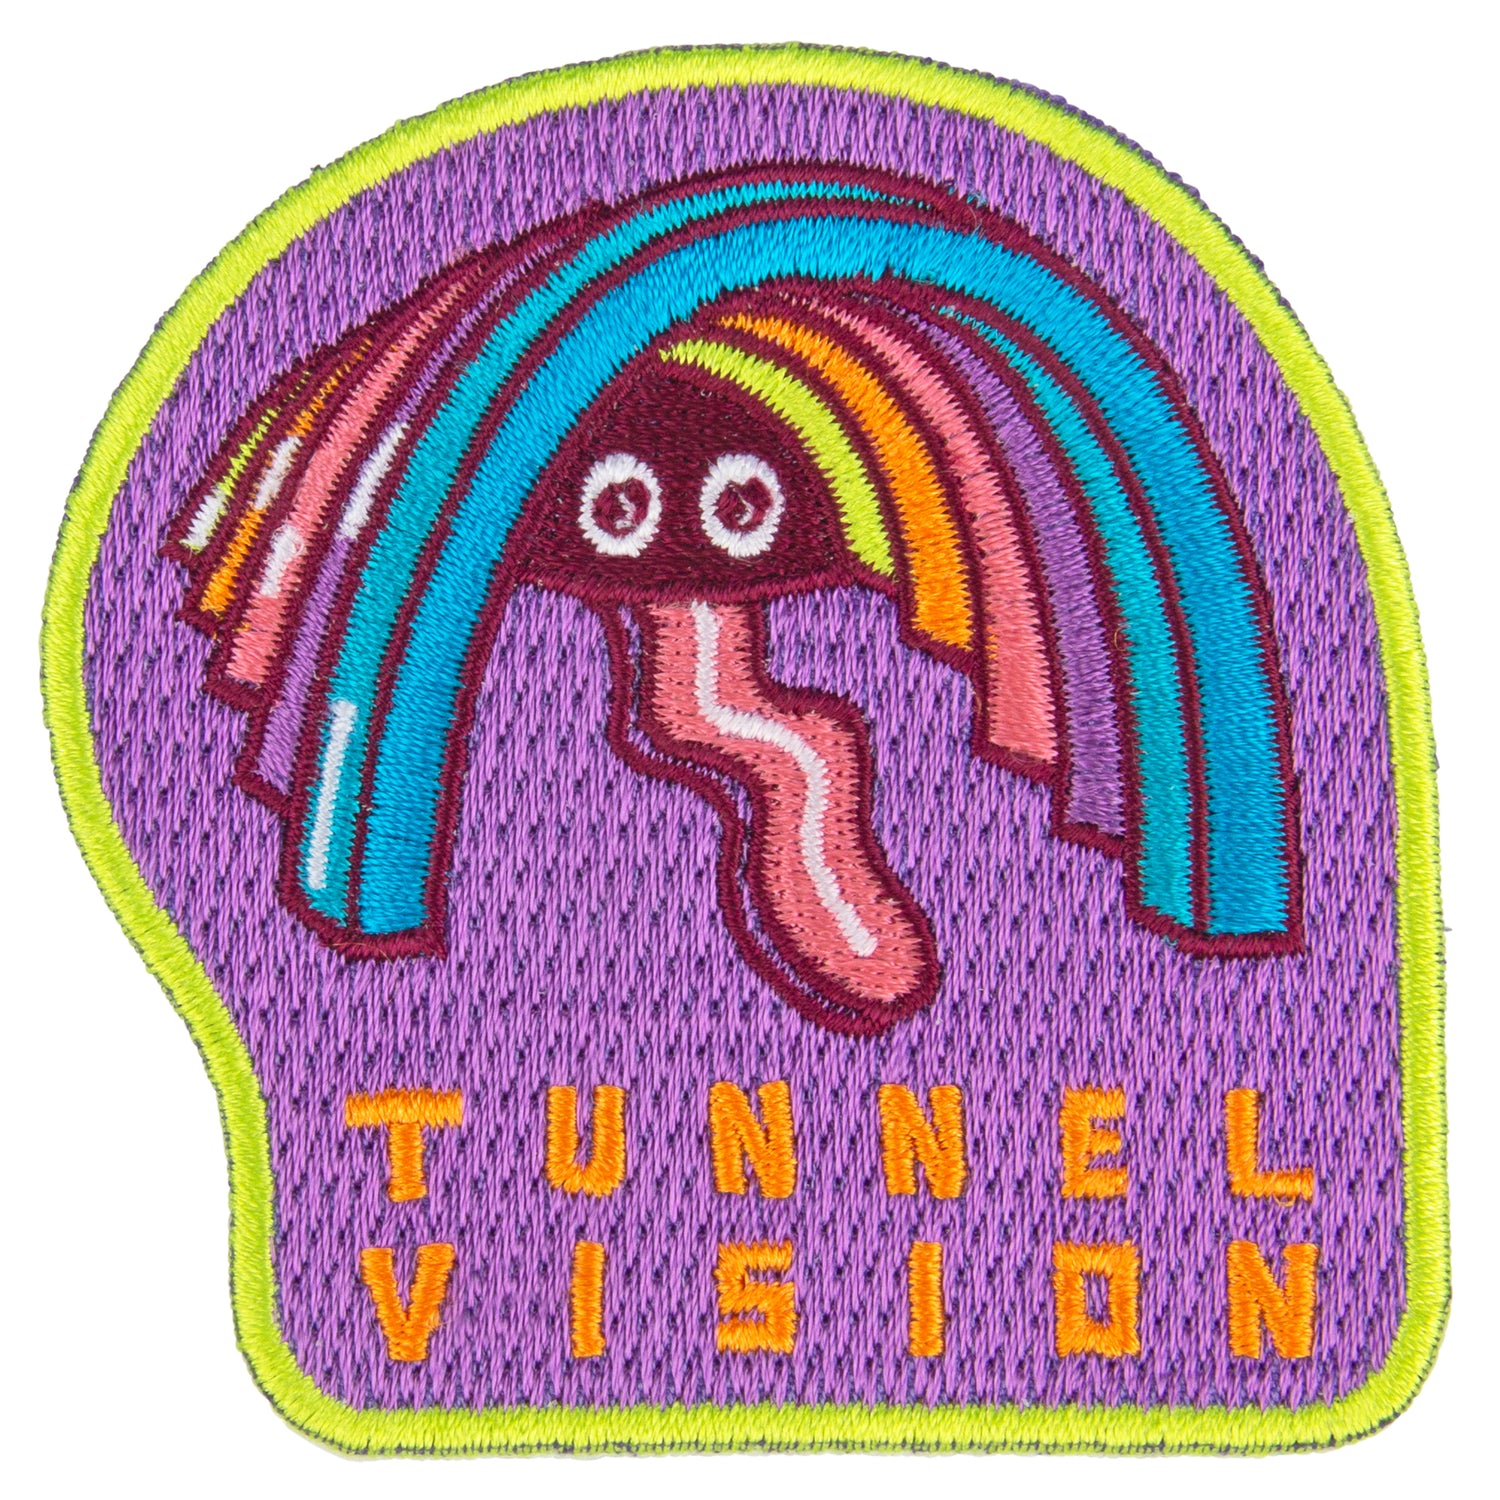 Tunnel Vision Patch